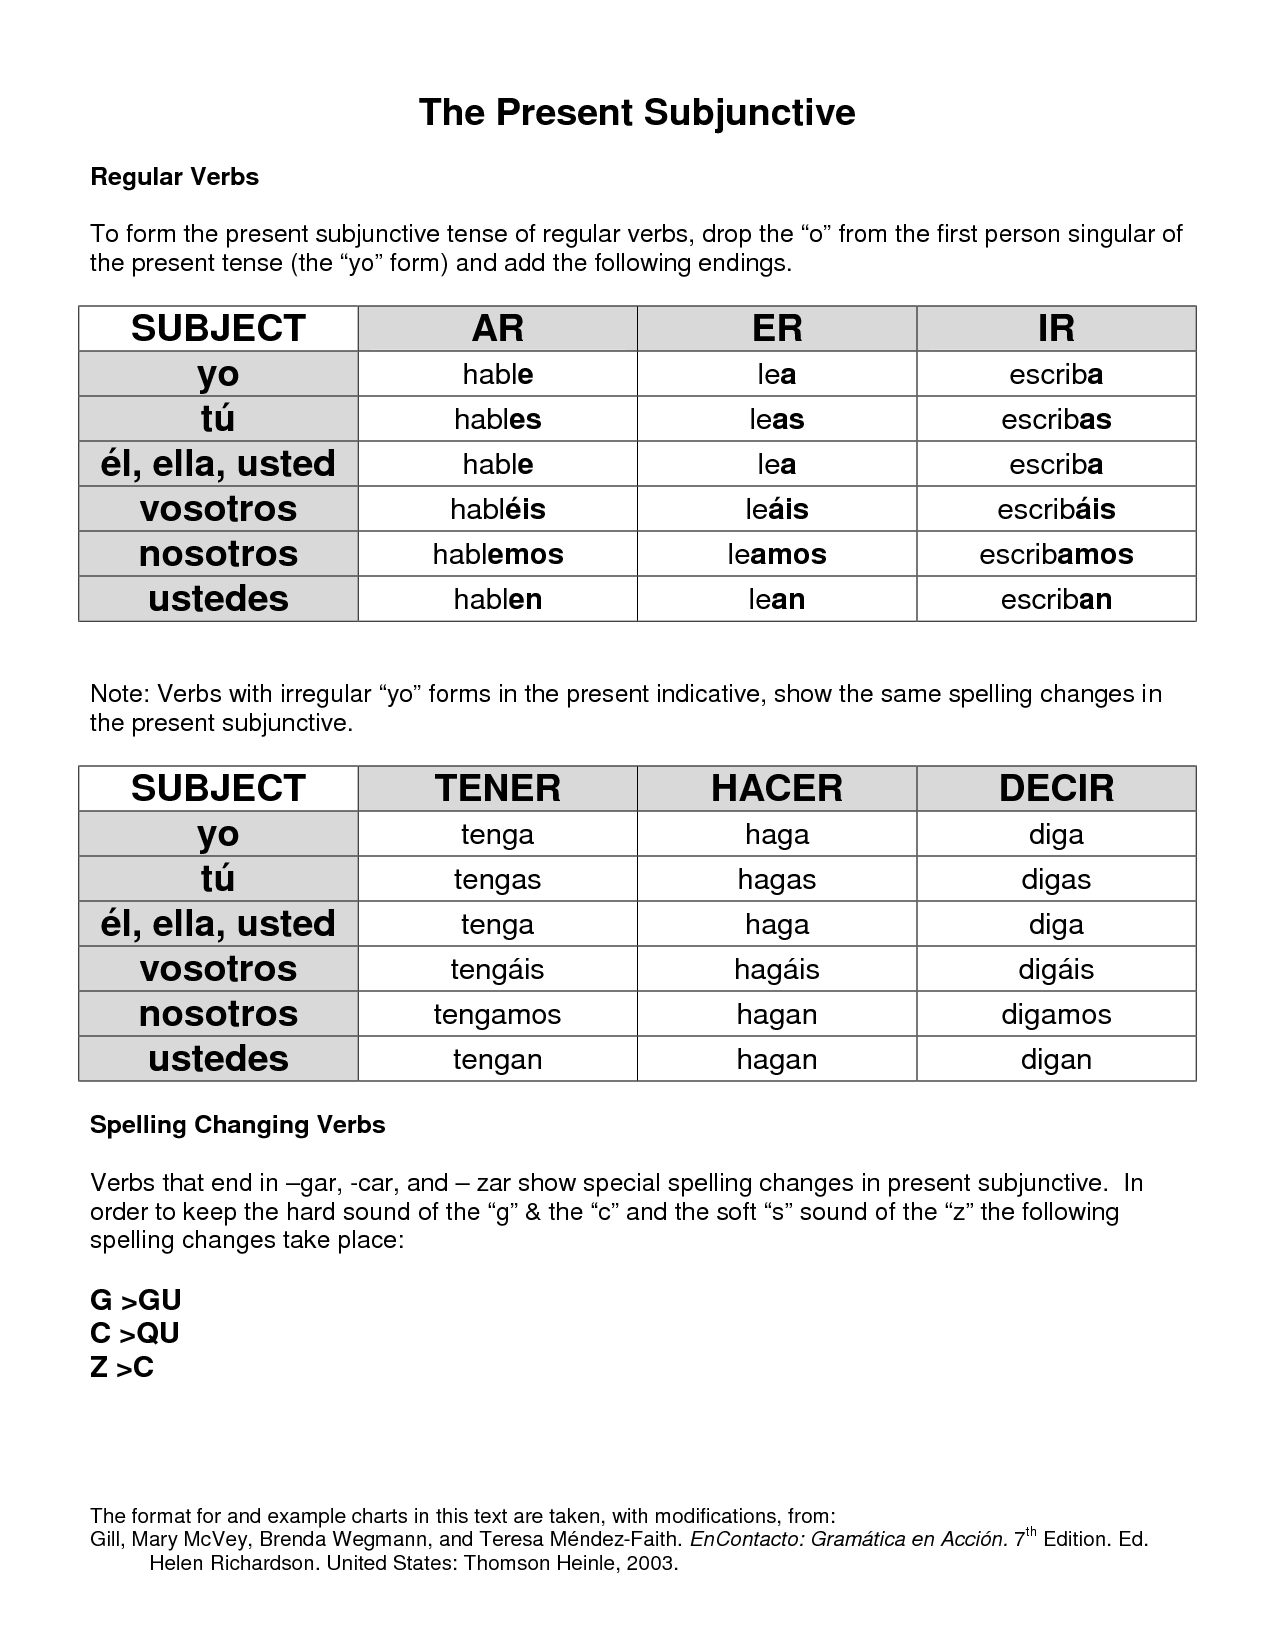 reflexive-verbs-spanish-worksheets-reflexive-verbs-worksheet-for-spanish-by-spice-up-your